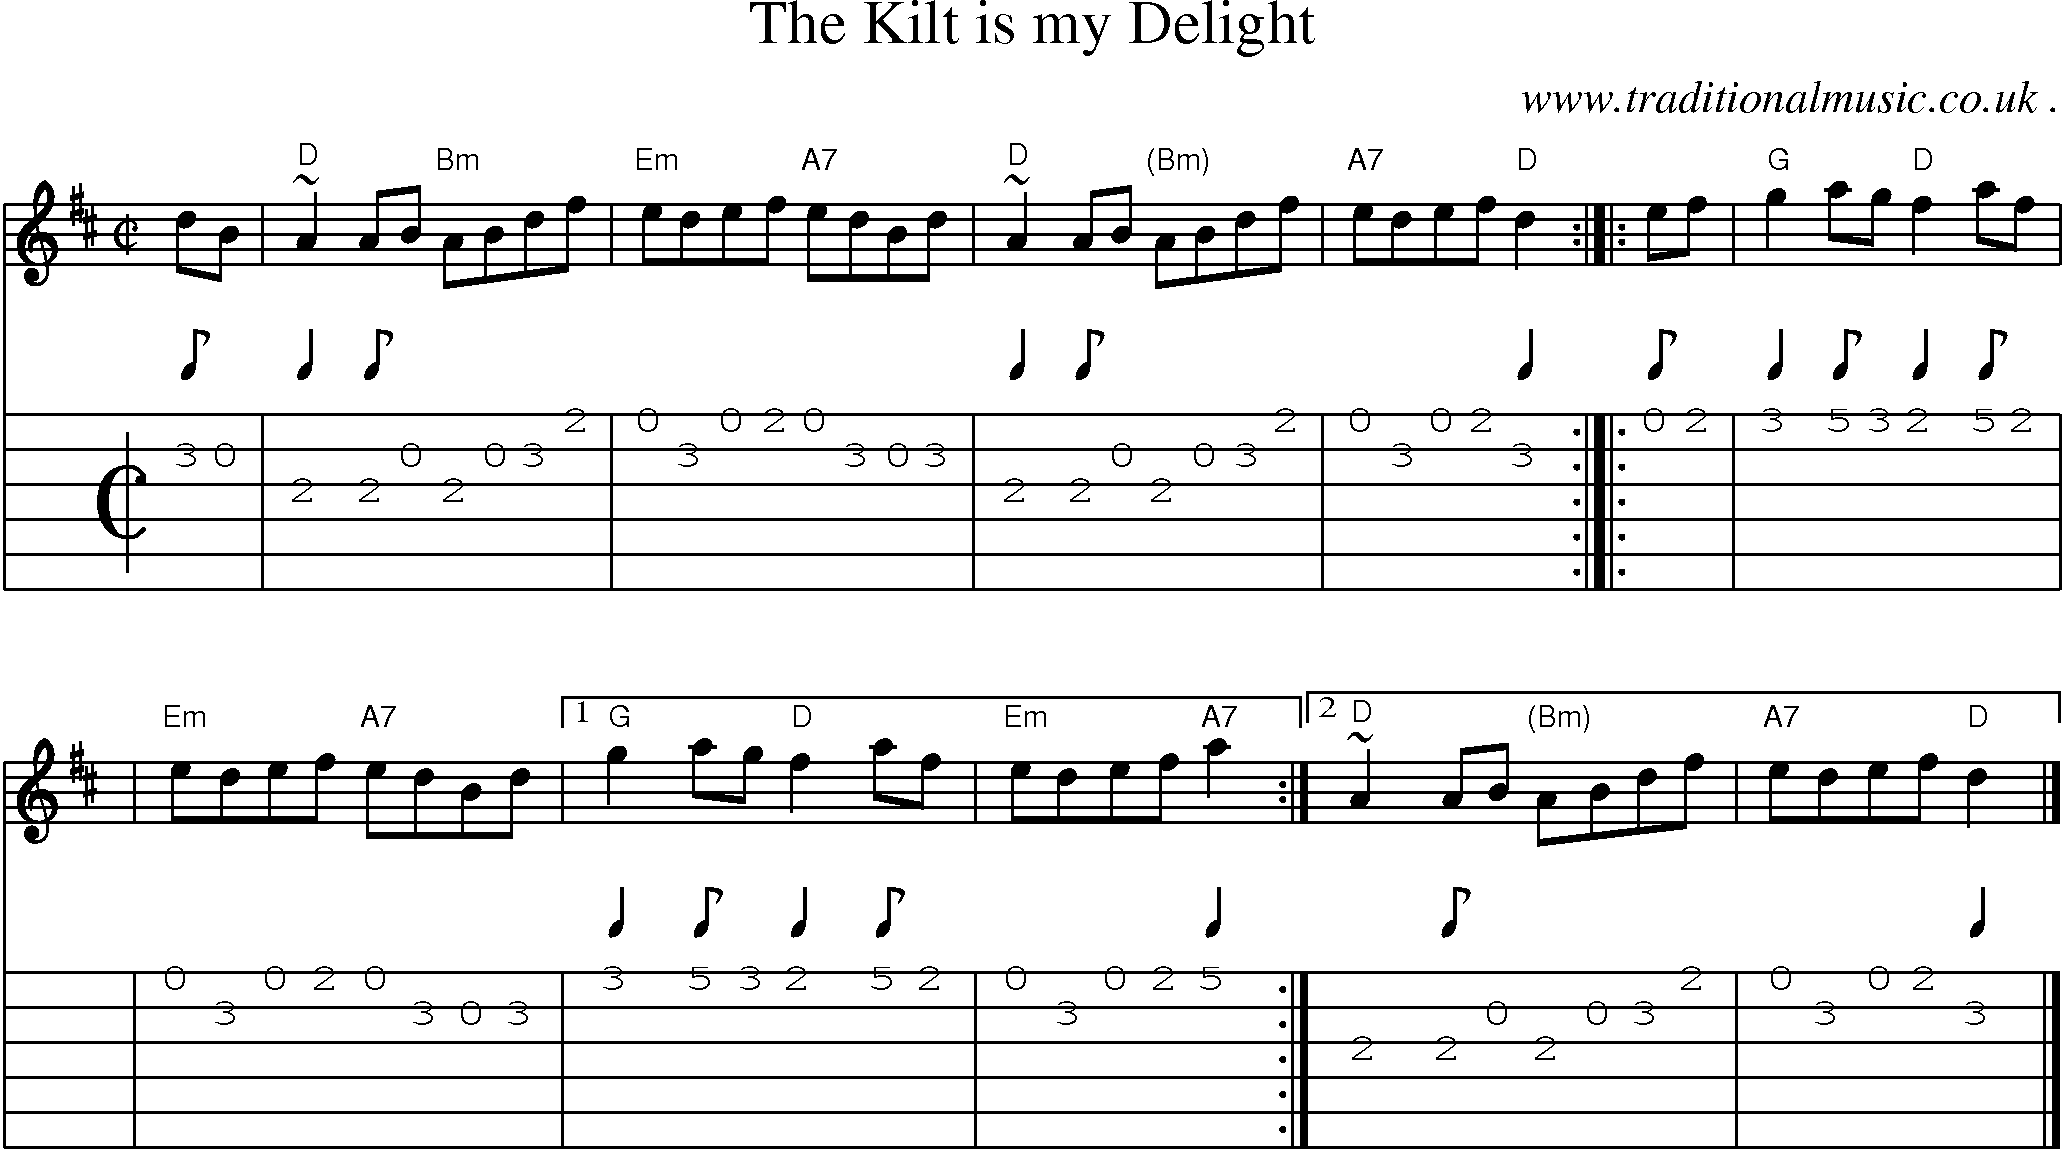 Sheet-music  score, Chords and Guitar Tabs for The Kilt Is My Delight